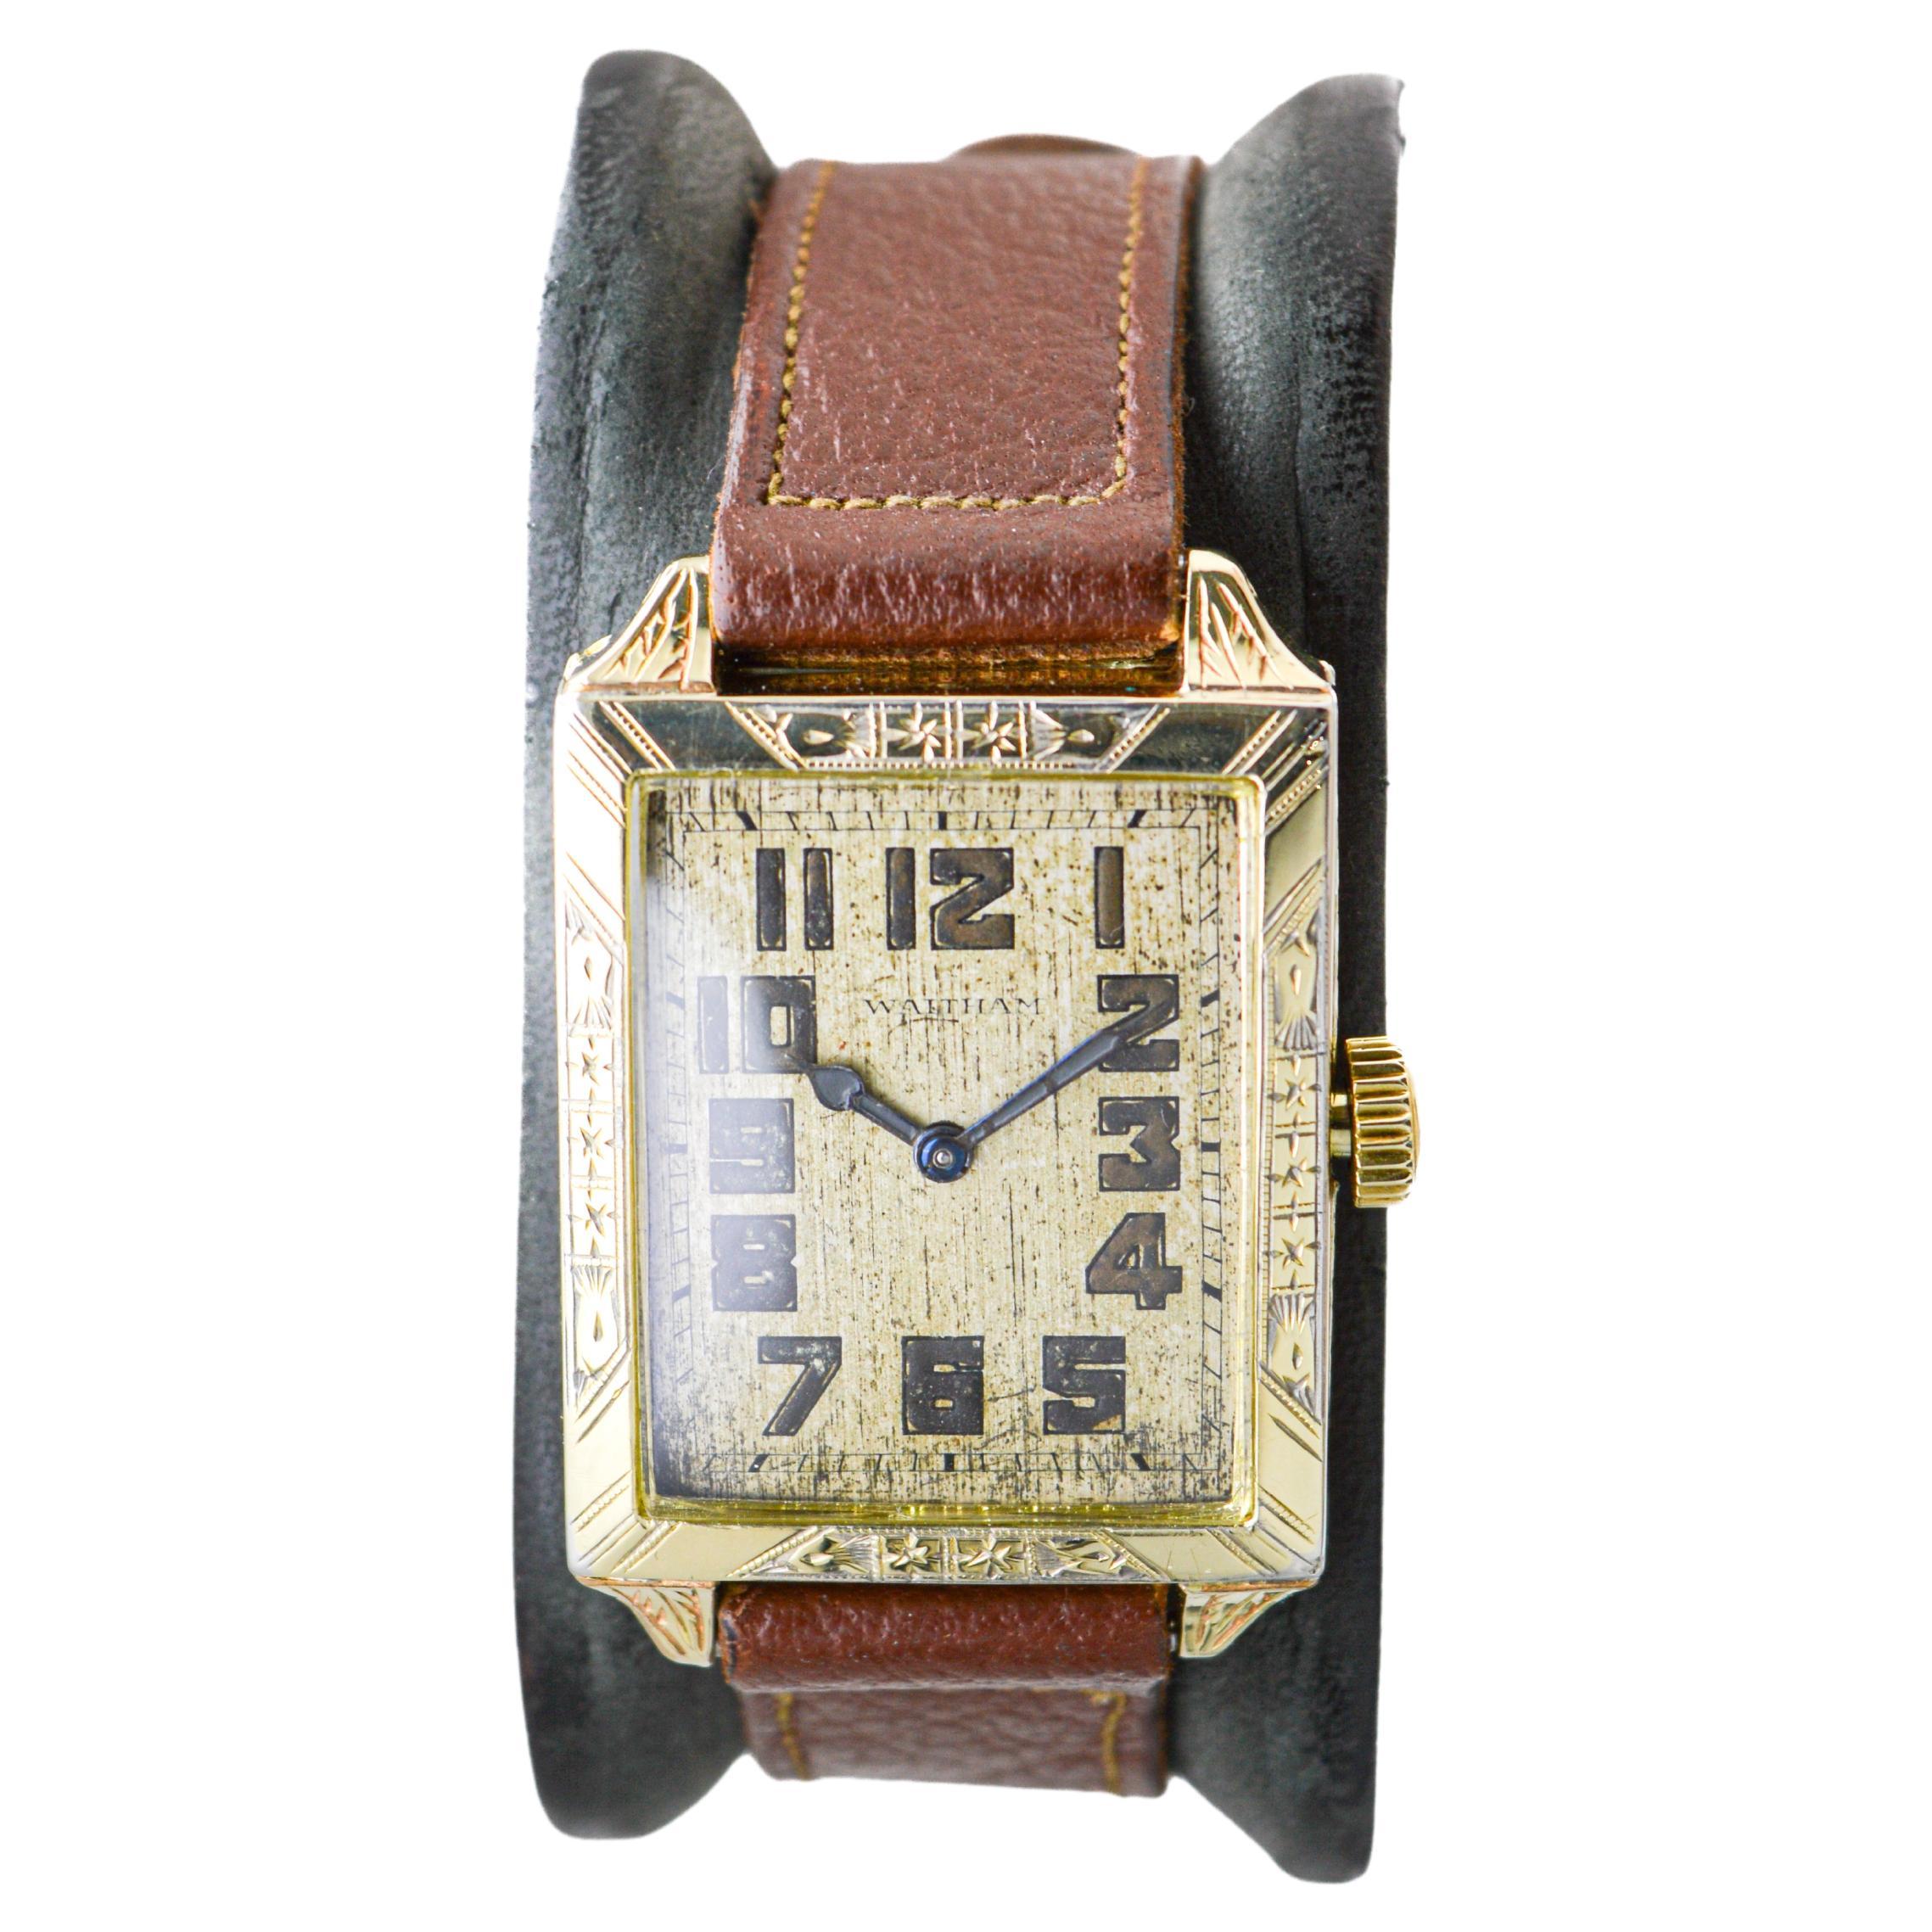 Waltham Yellow Gold Filled Art Deco Watch with Original Dial from 1926